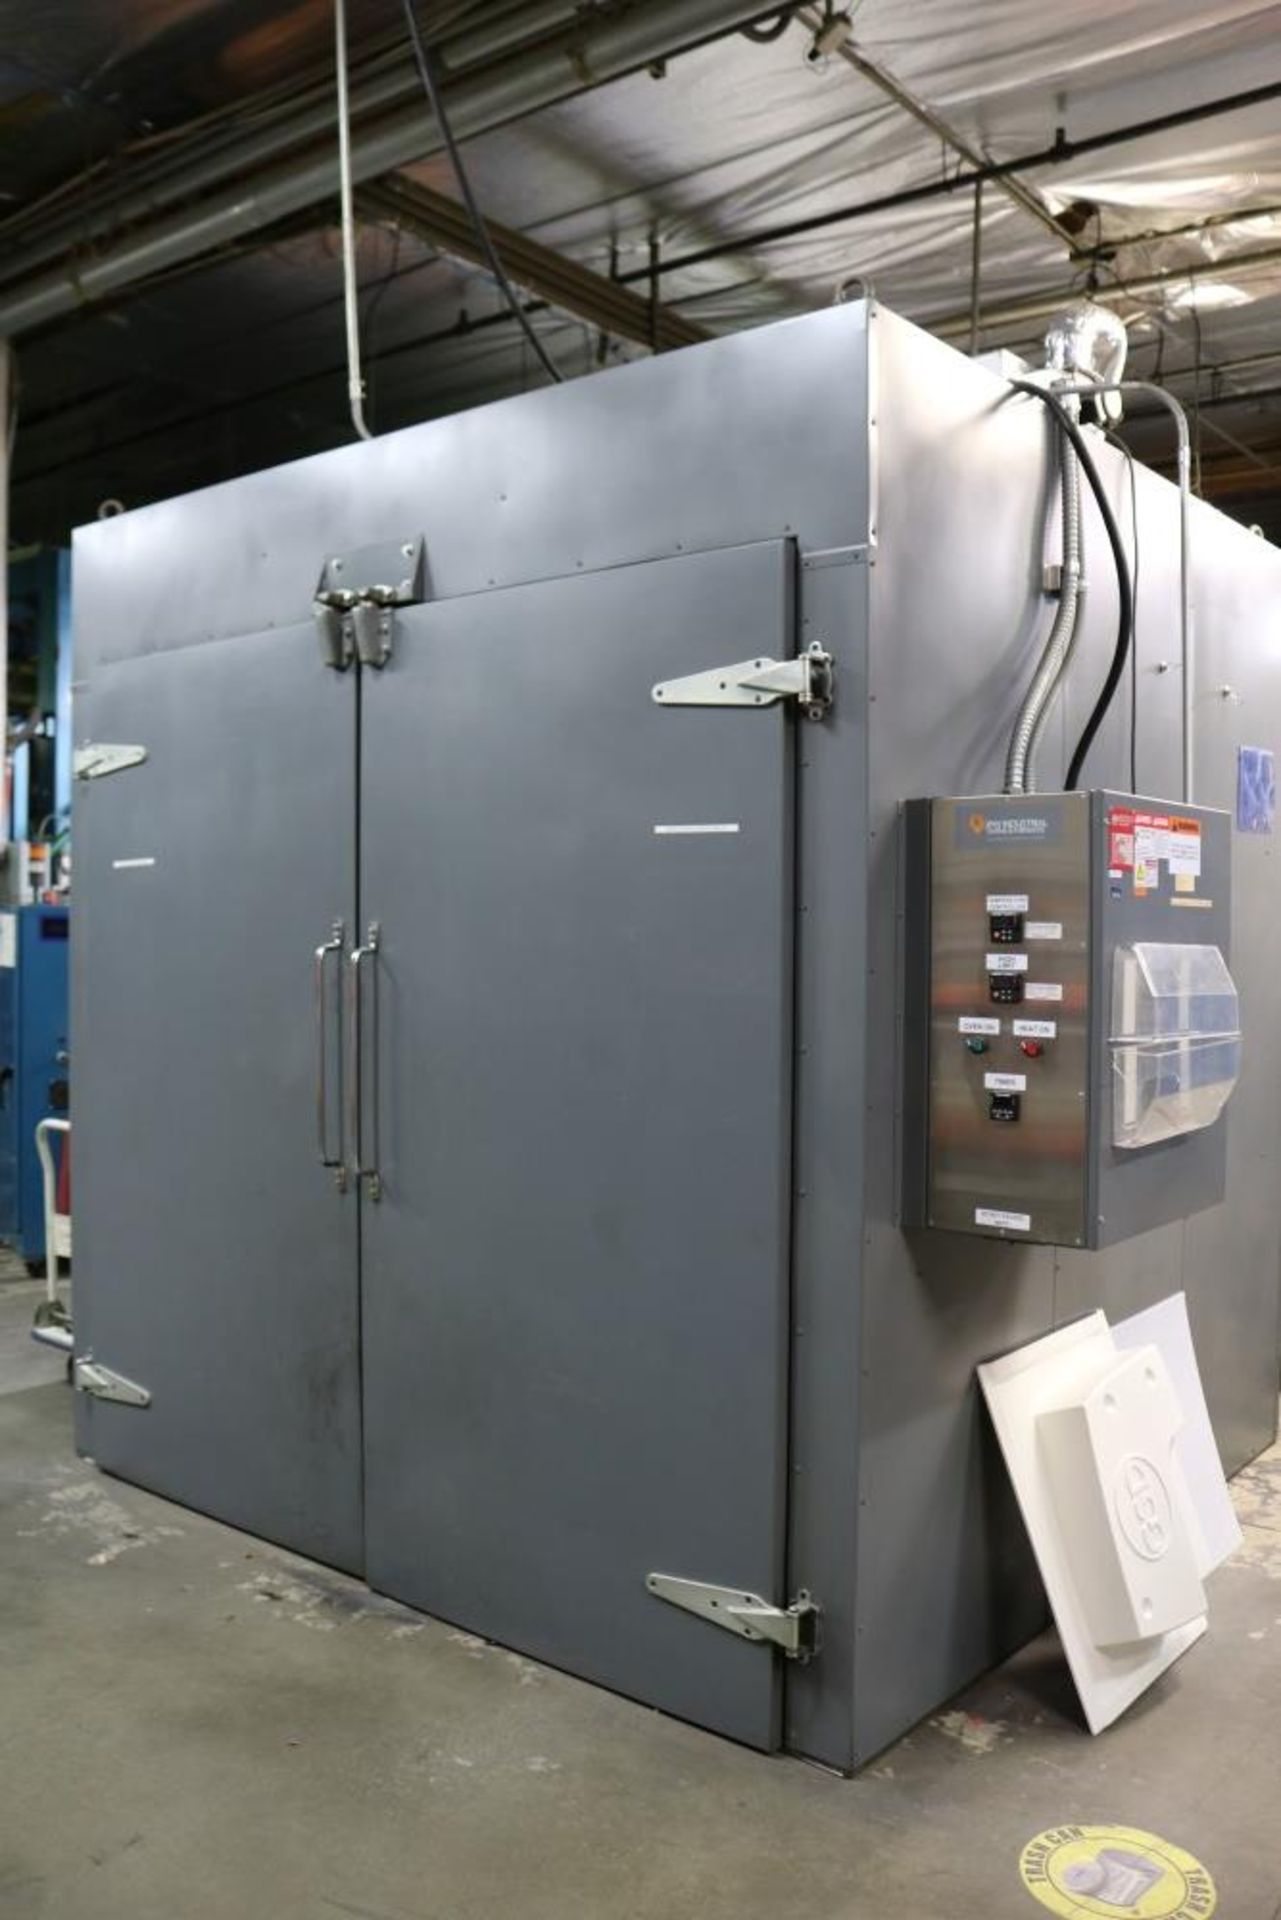 2015 JPW Design and Manufacturing Moel ST777TUL, 84"Cubed, 500 Degrees F Max, 343 CUFT Max Capacity, - Image 5 of 10